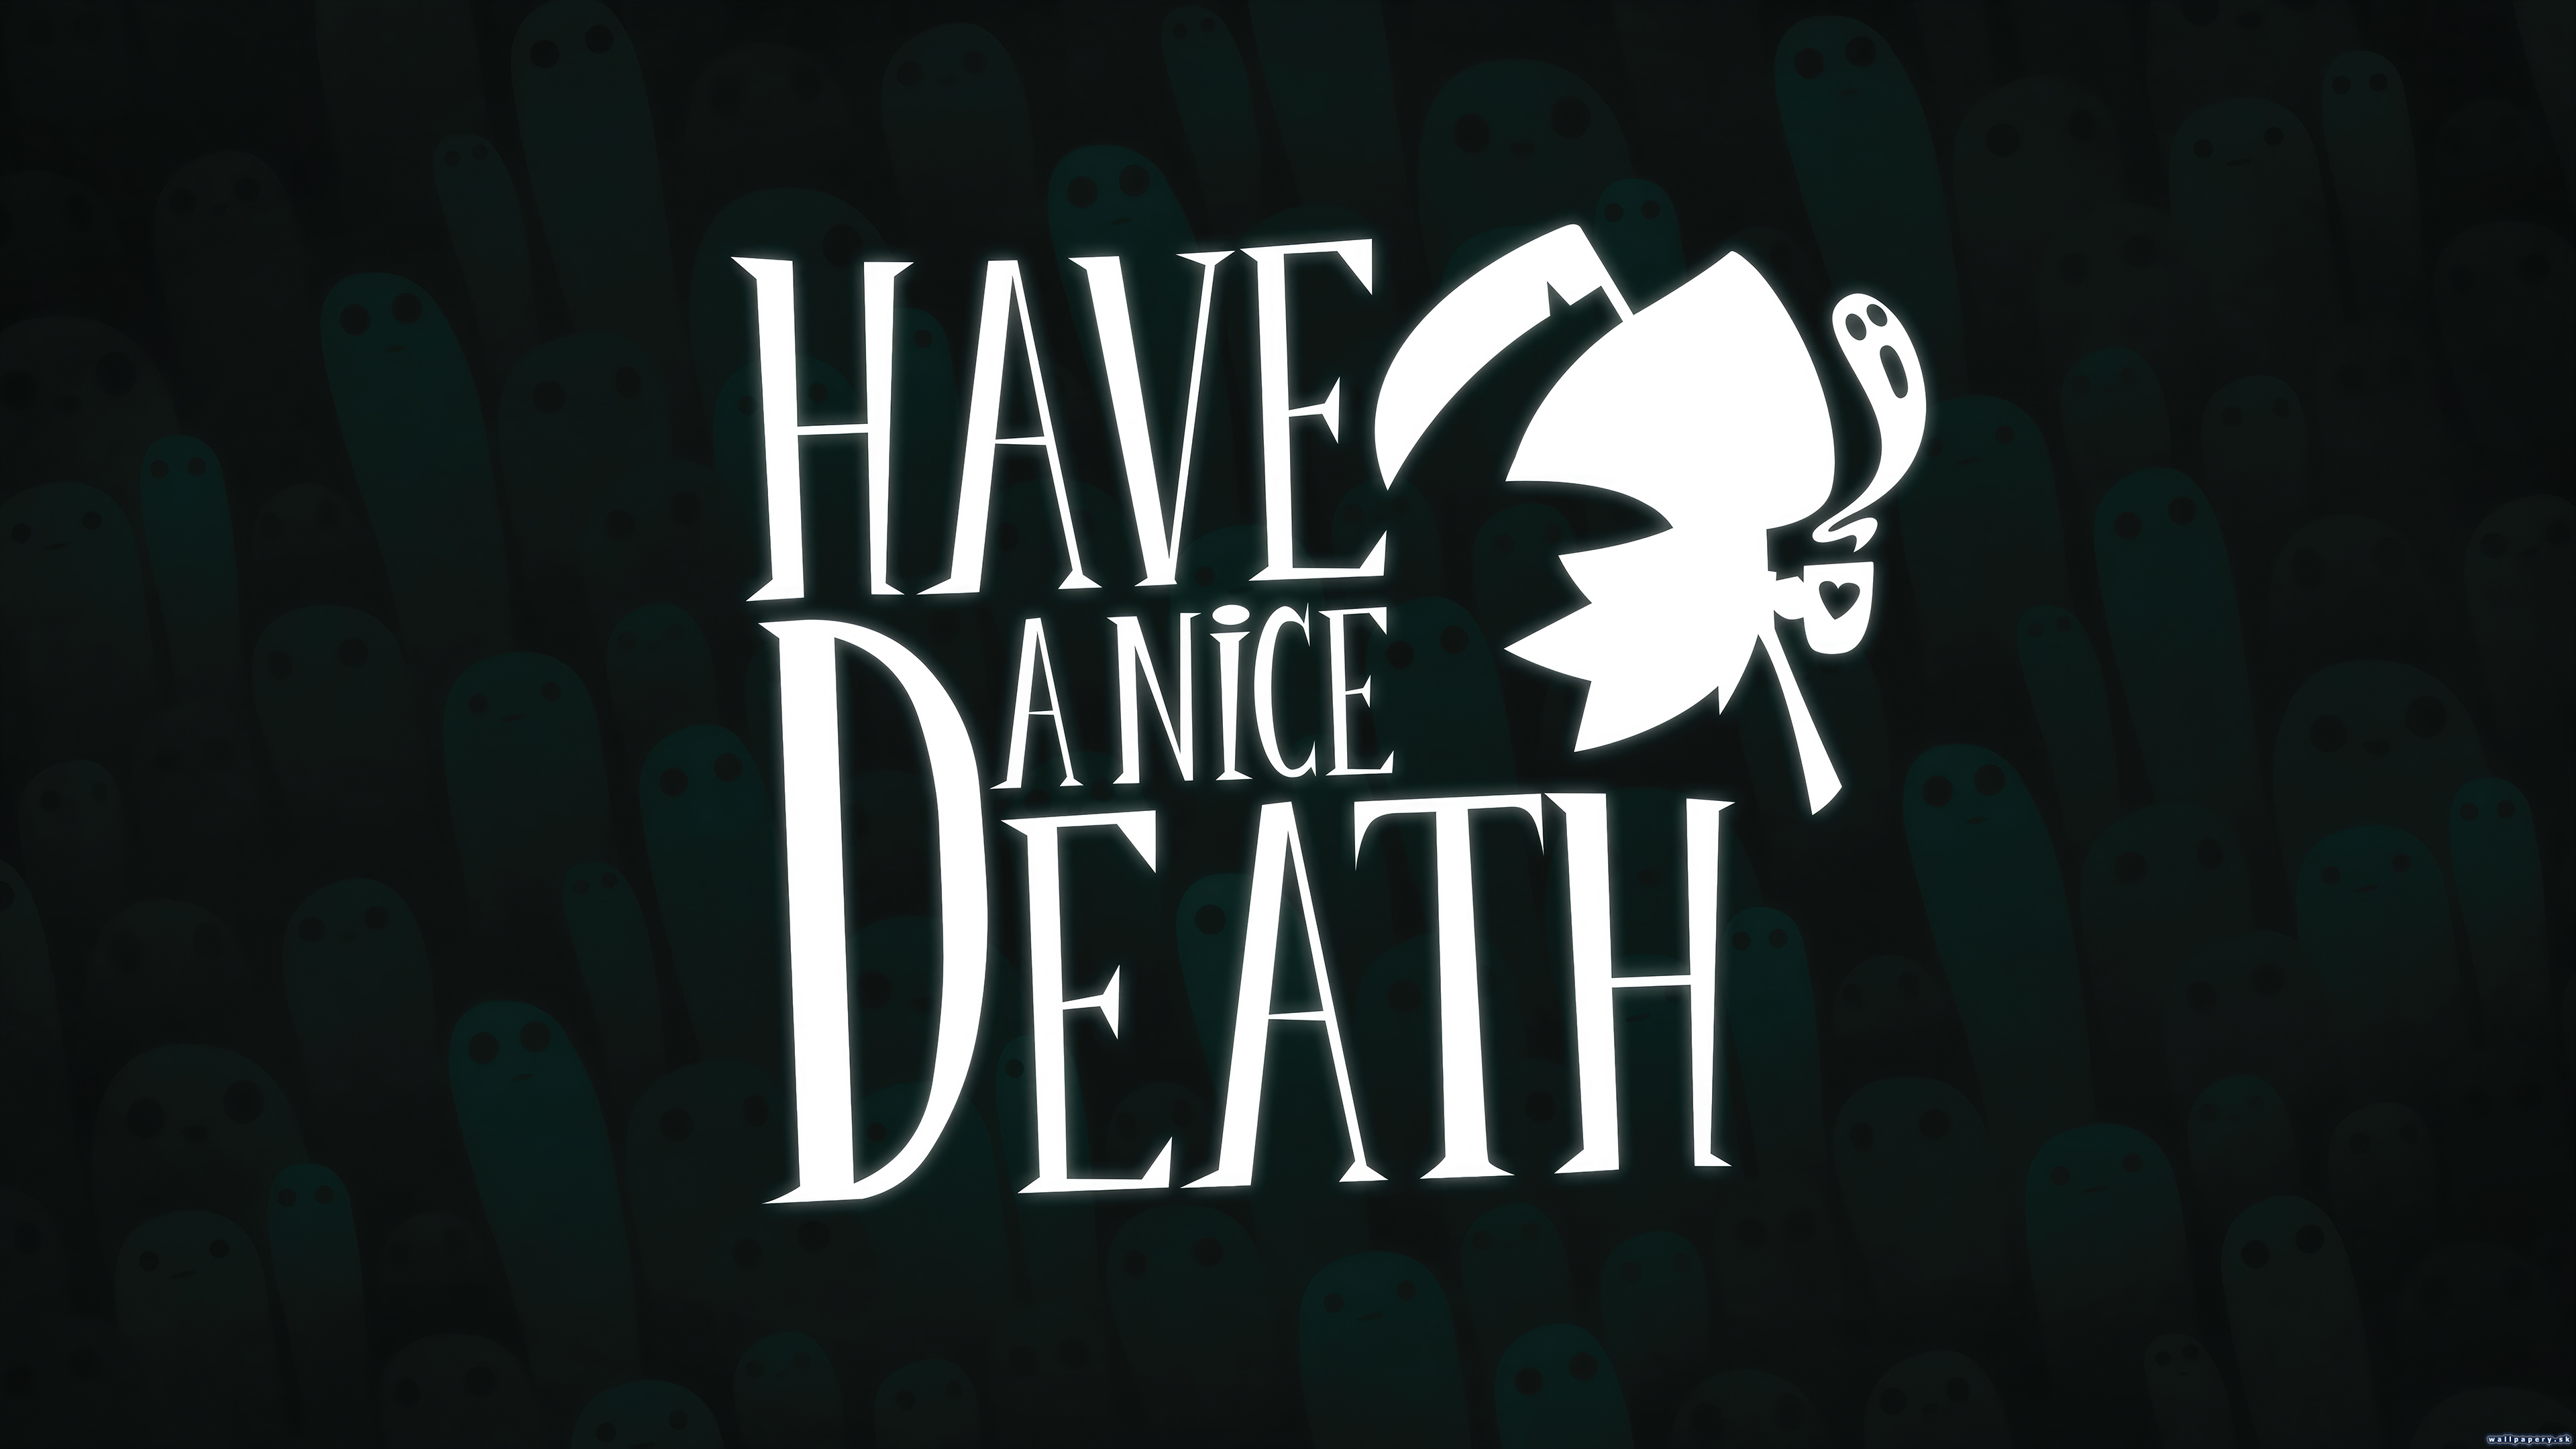 Have a Nice Death - wallpaper 5